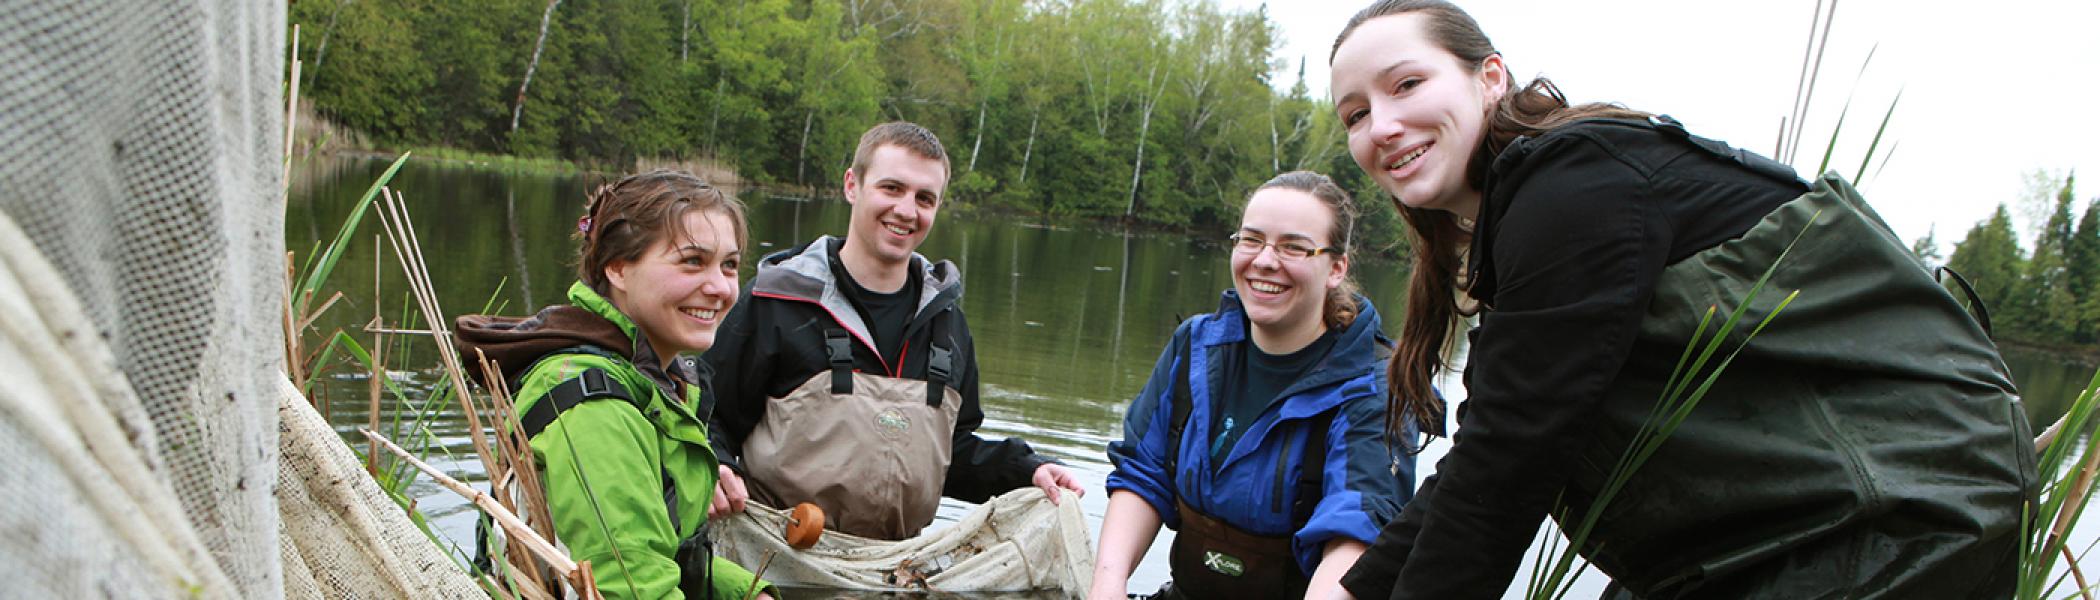 Students standing in a river on a cloudy day gathering river samples